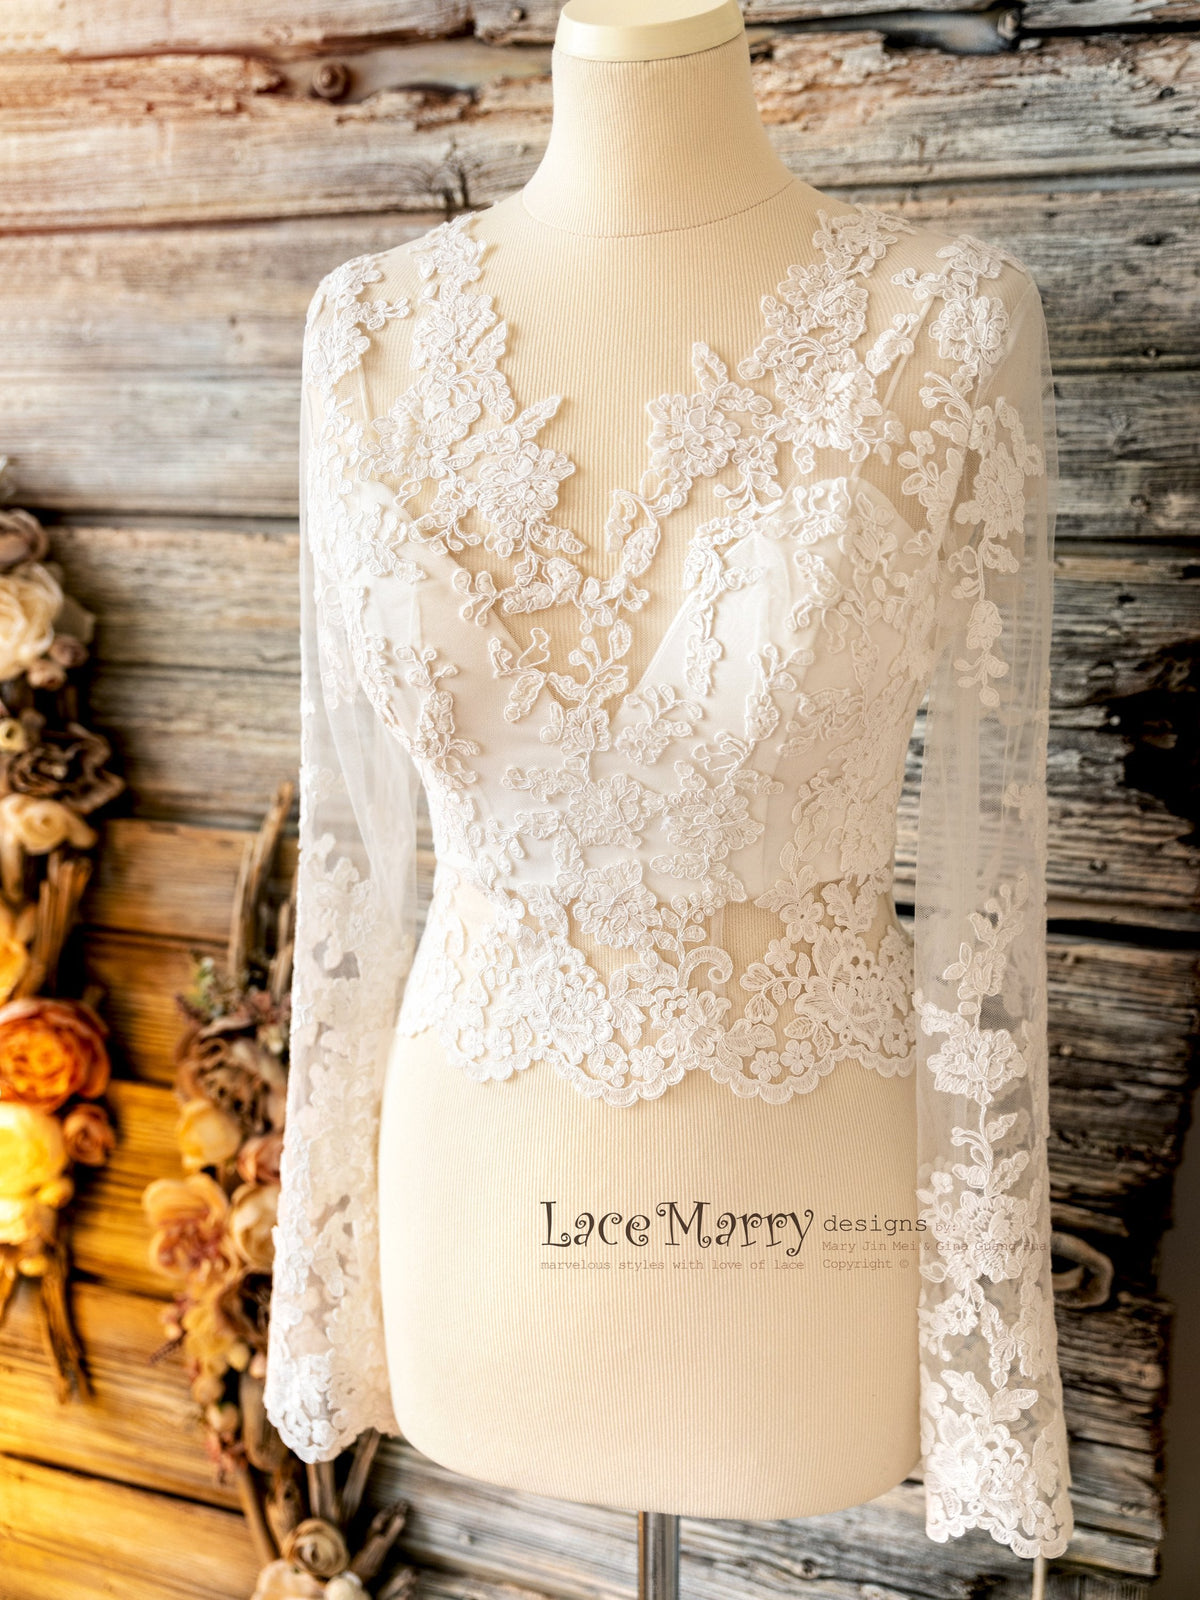 Handmade Lace Topper with Bustier